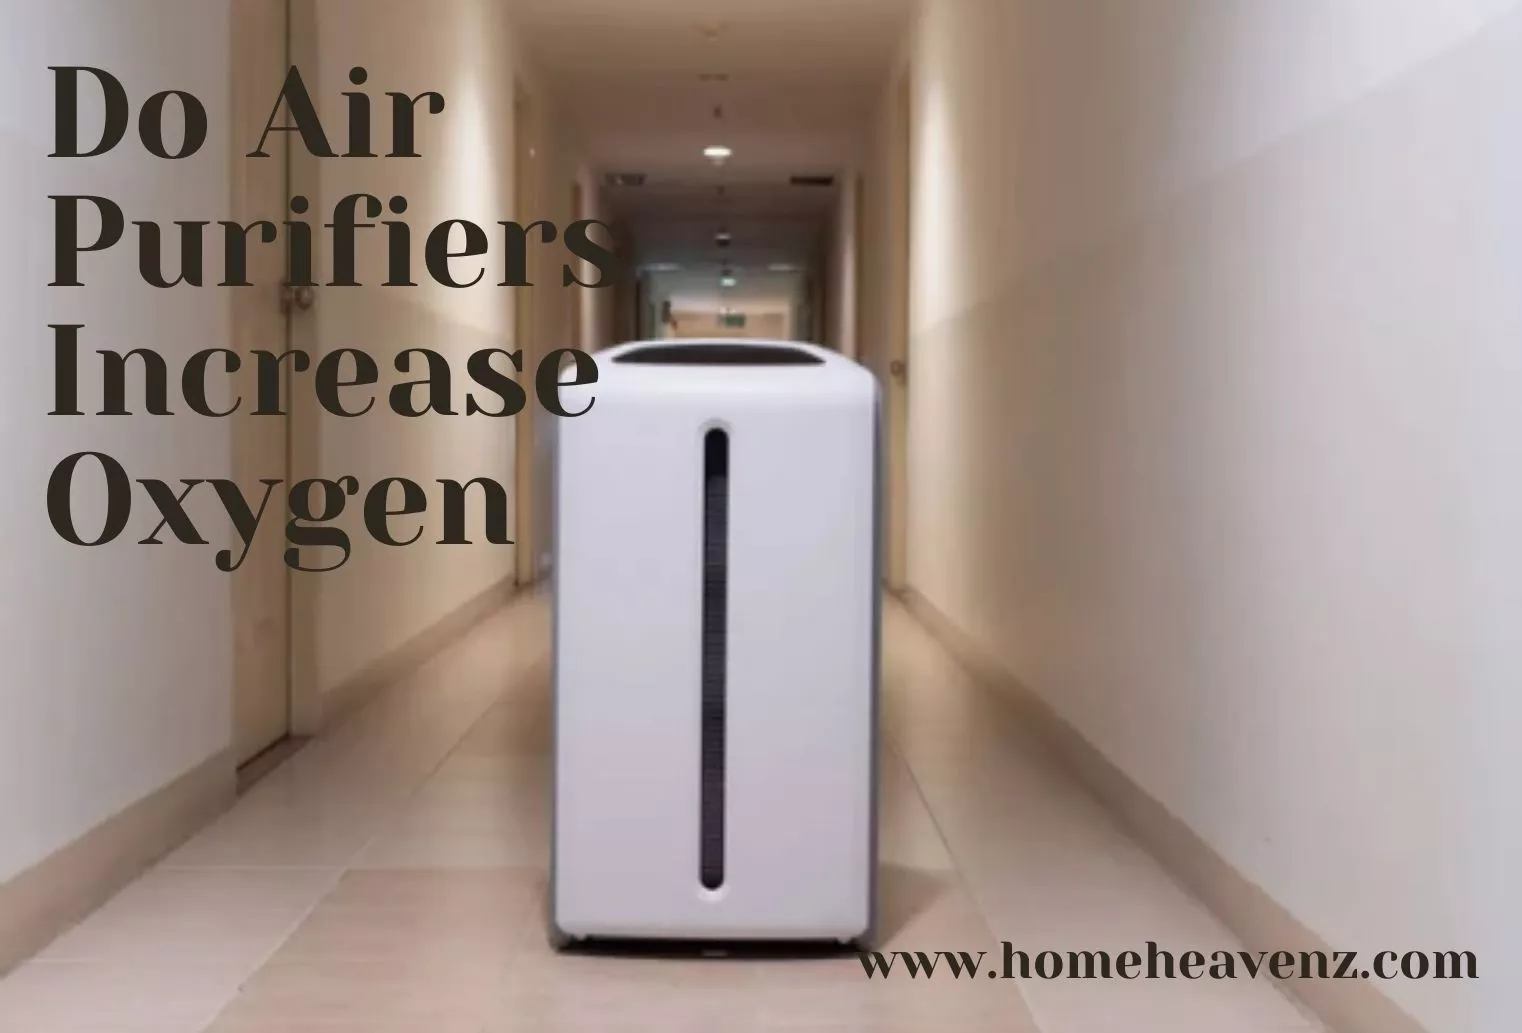 Do Air Purifiers Increase Oxygen